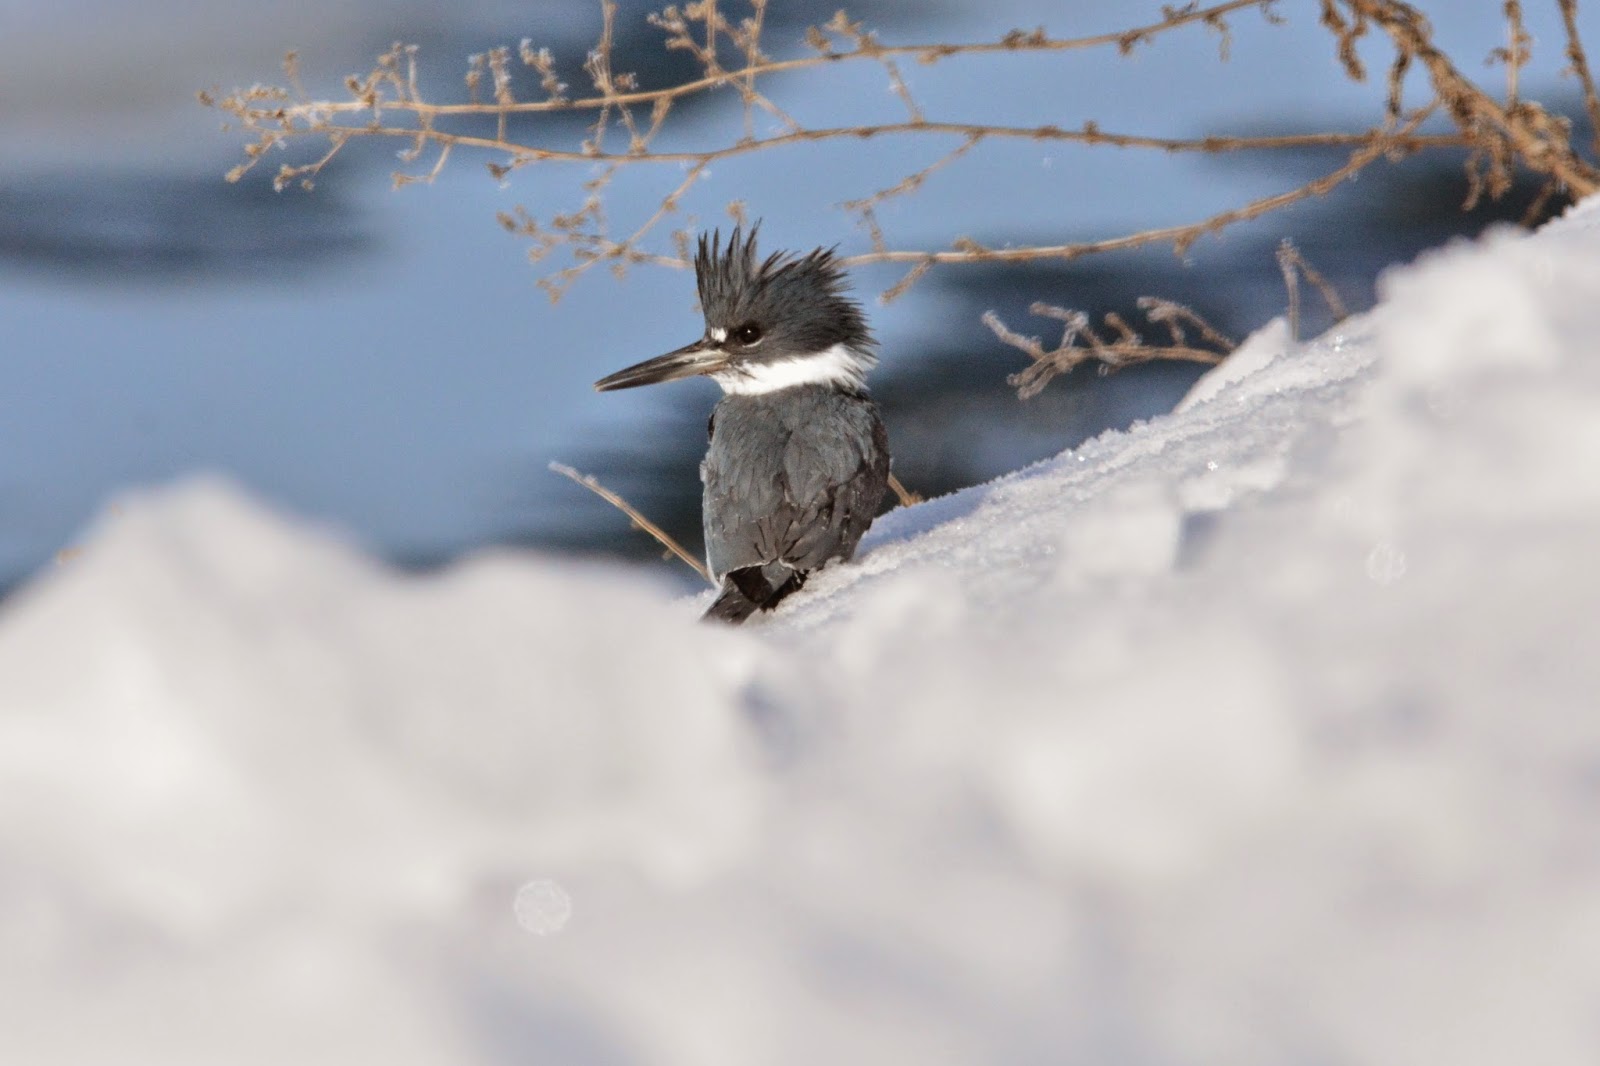 Bill Schiess&#39; Wild in Idaho - Experiences and Essays of Life: Belted Kingfisher in action